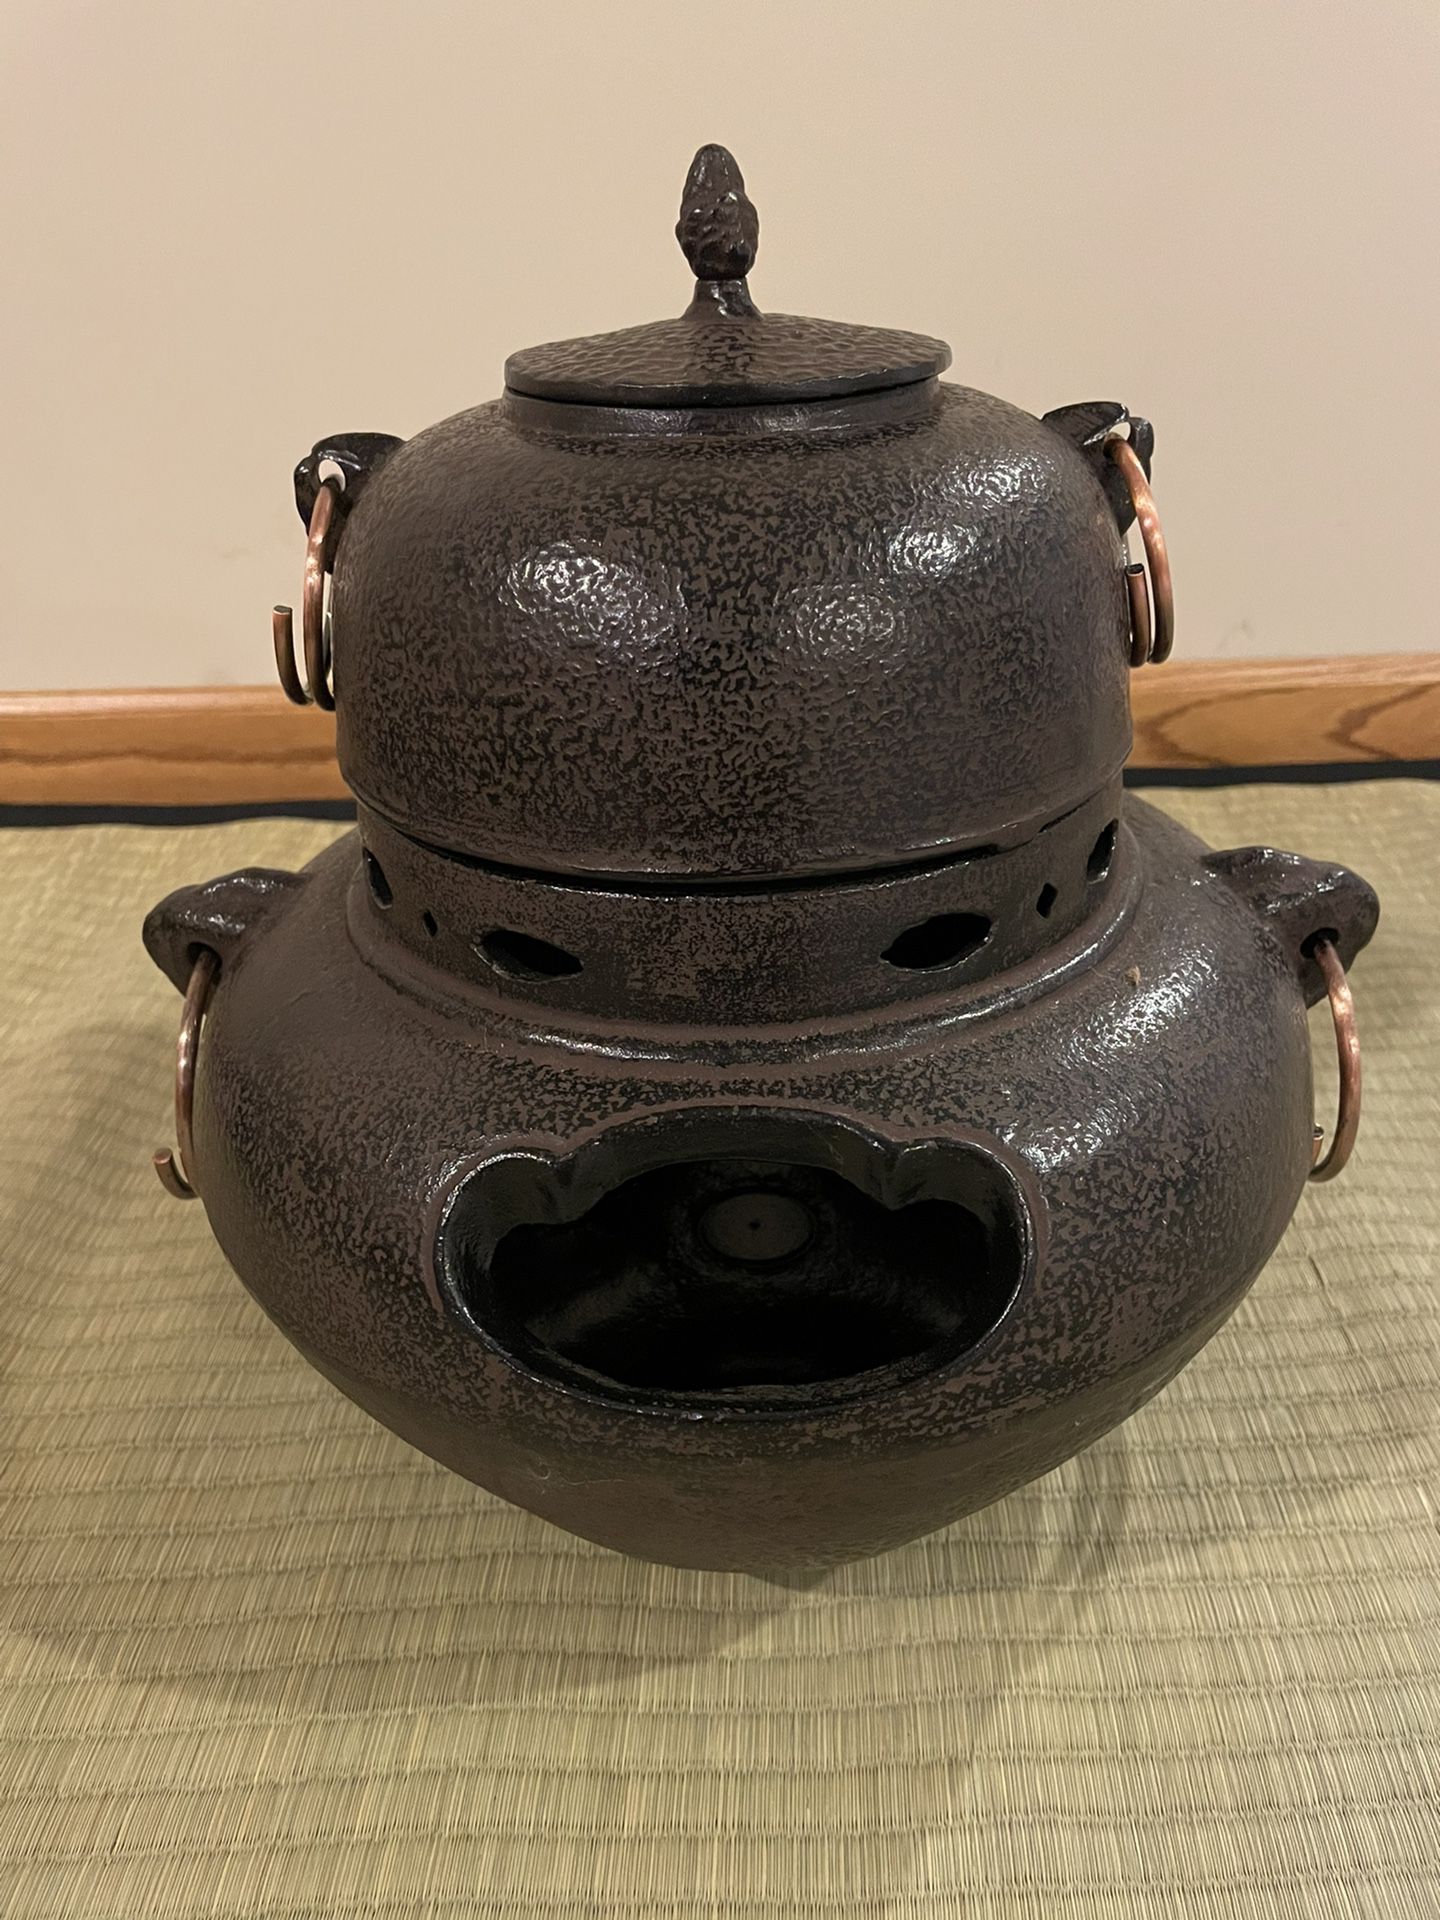 Chagama Japanese Traditional Steel Kettle For Tea Ceremony 